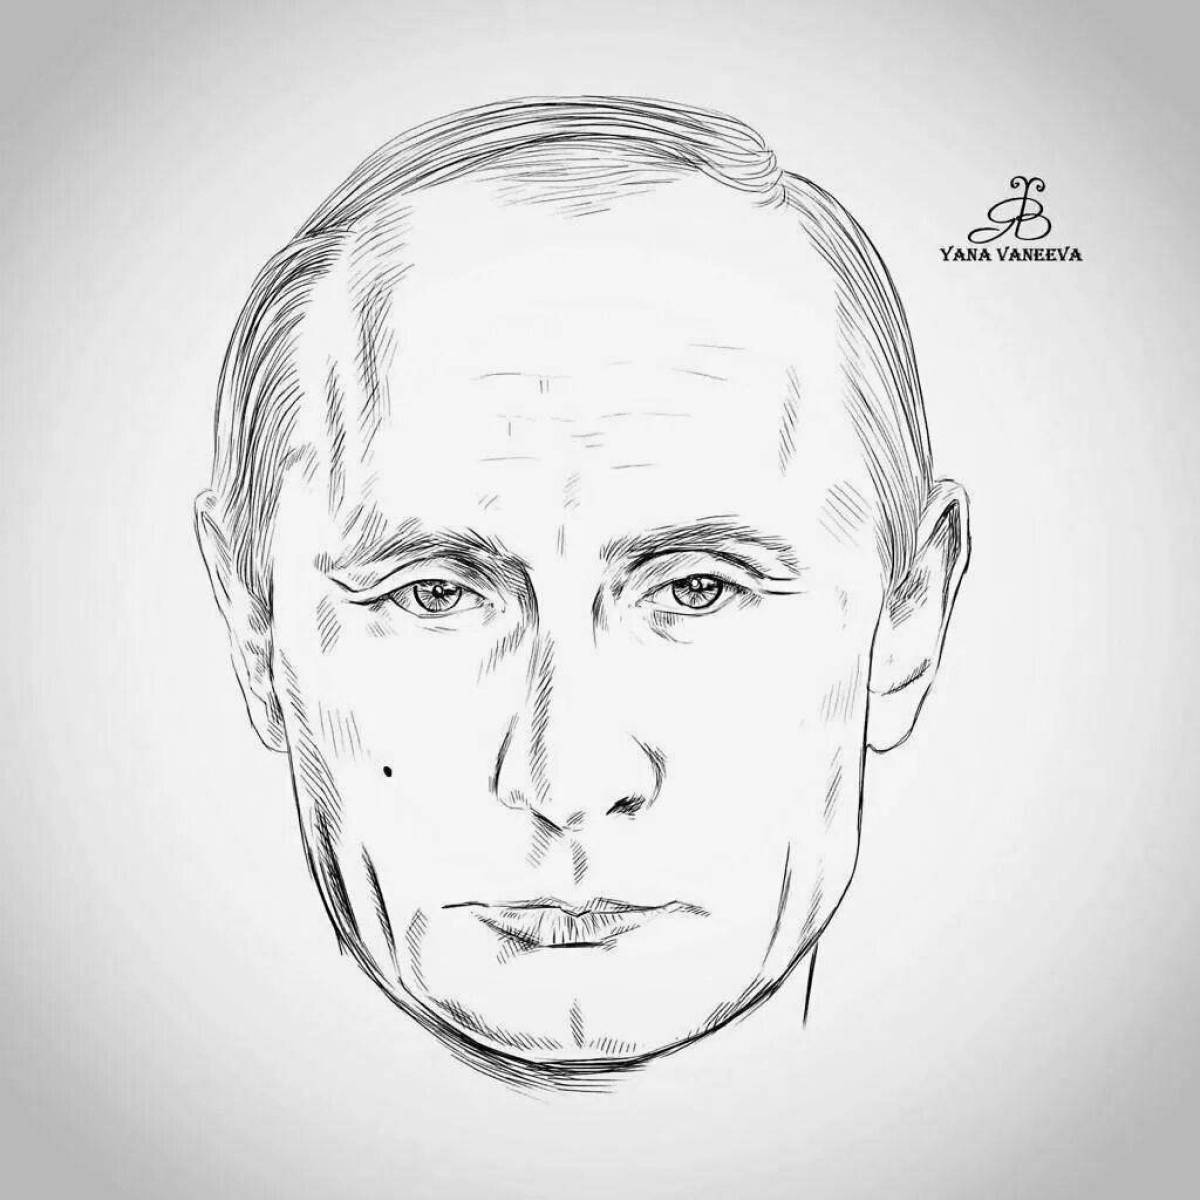 Putin's colorful coloring book for kids